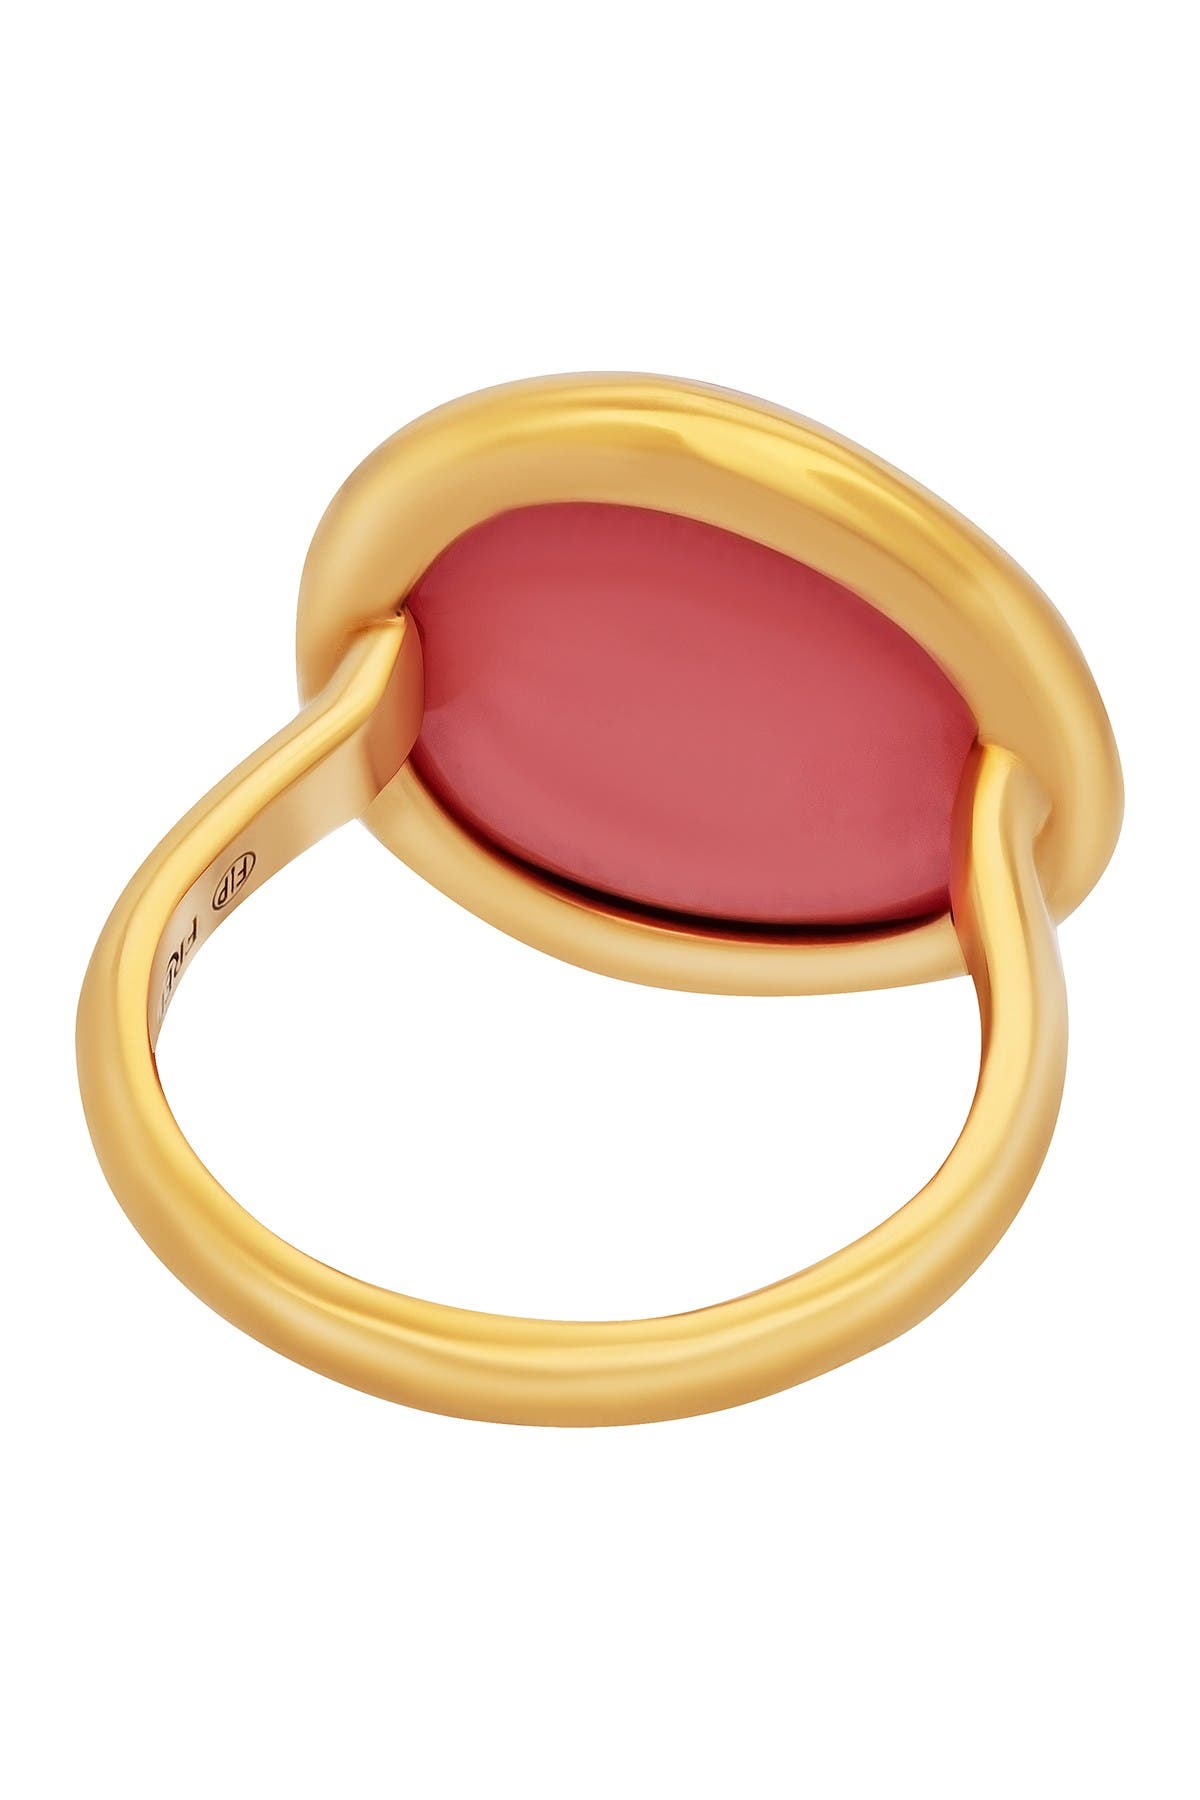 Fred Of Paris Rose Gold Rhochrosite Statement Ring In Bright Pink